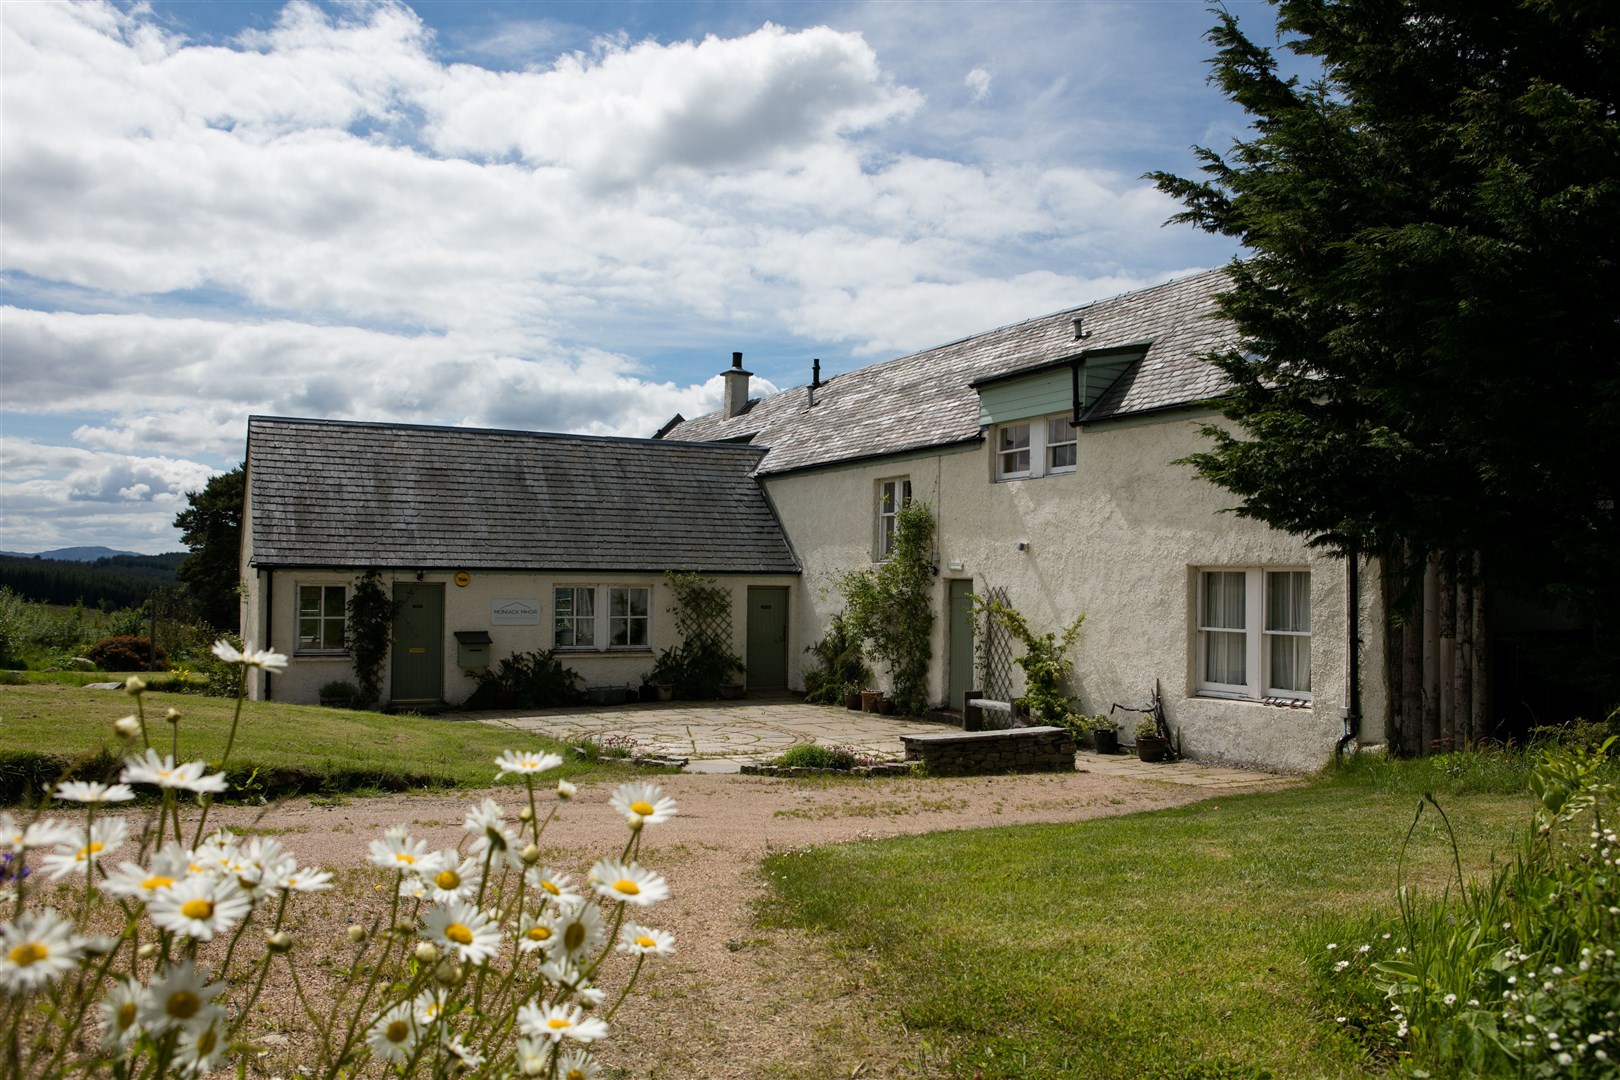 Moniack Mhor house and cottage.